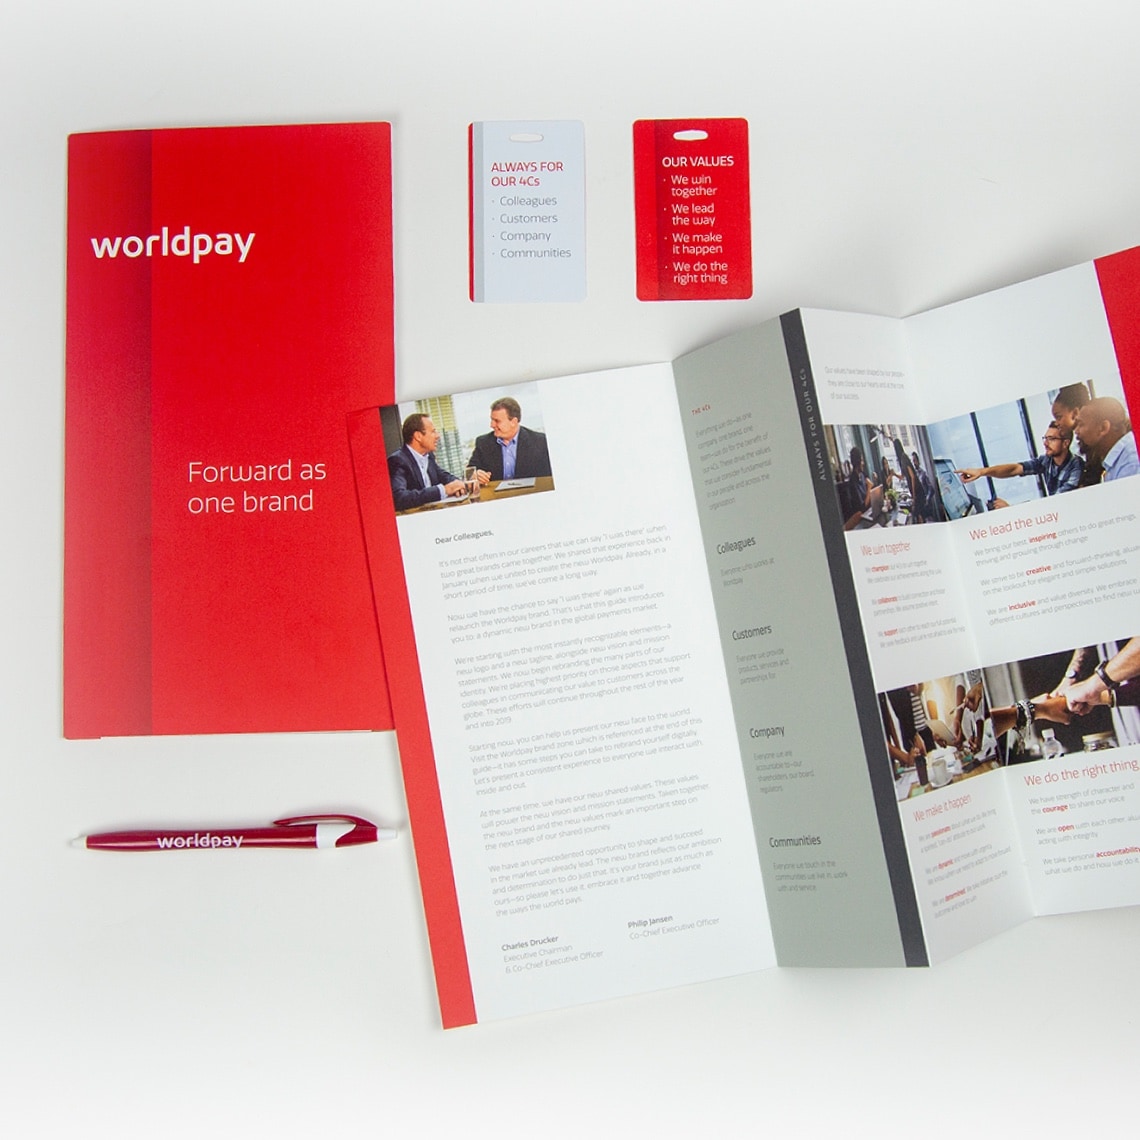 Examples of printed material including brand brochure, ID cards, and branded pen